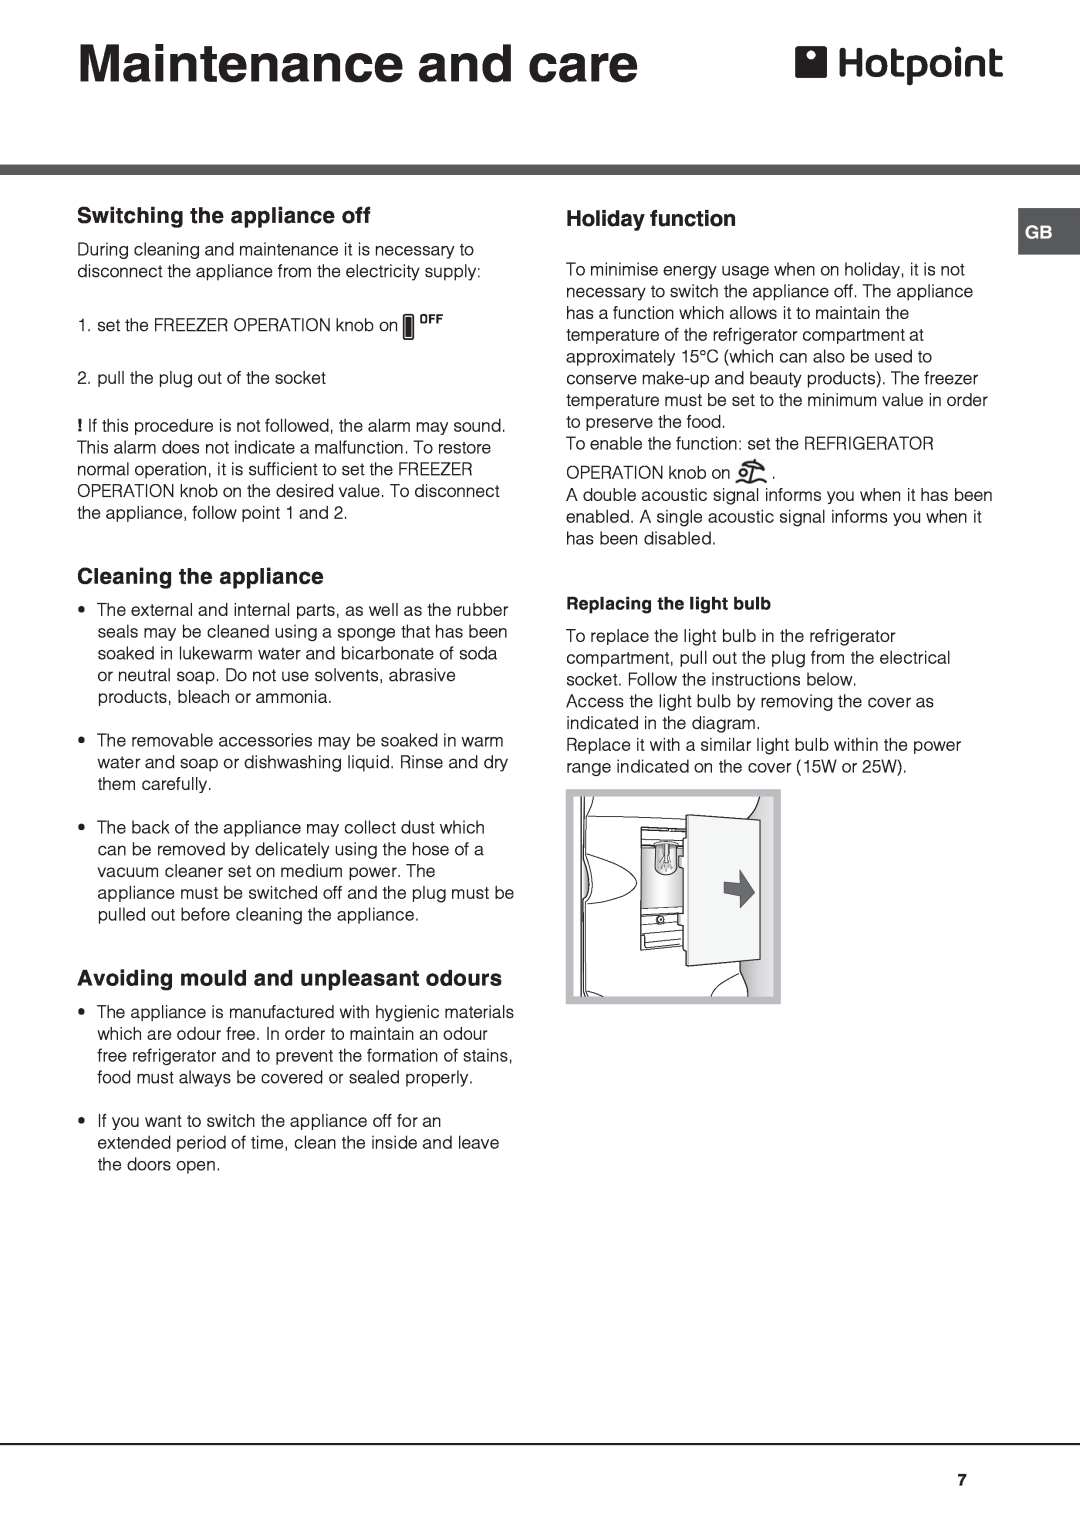 Hotpoint FFB6200AX manual Maintenance and care, Switching the appliance off, Holiday function, Cleaning the appliance 